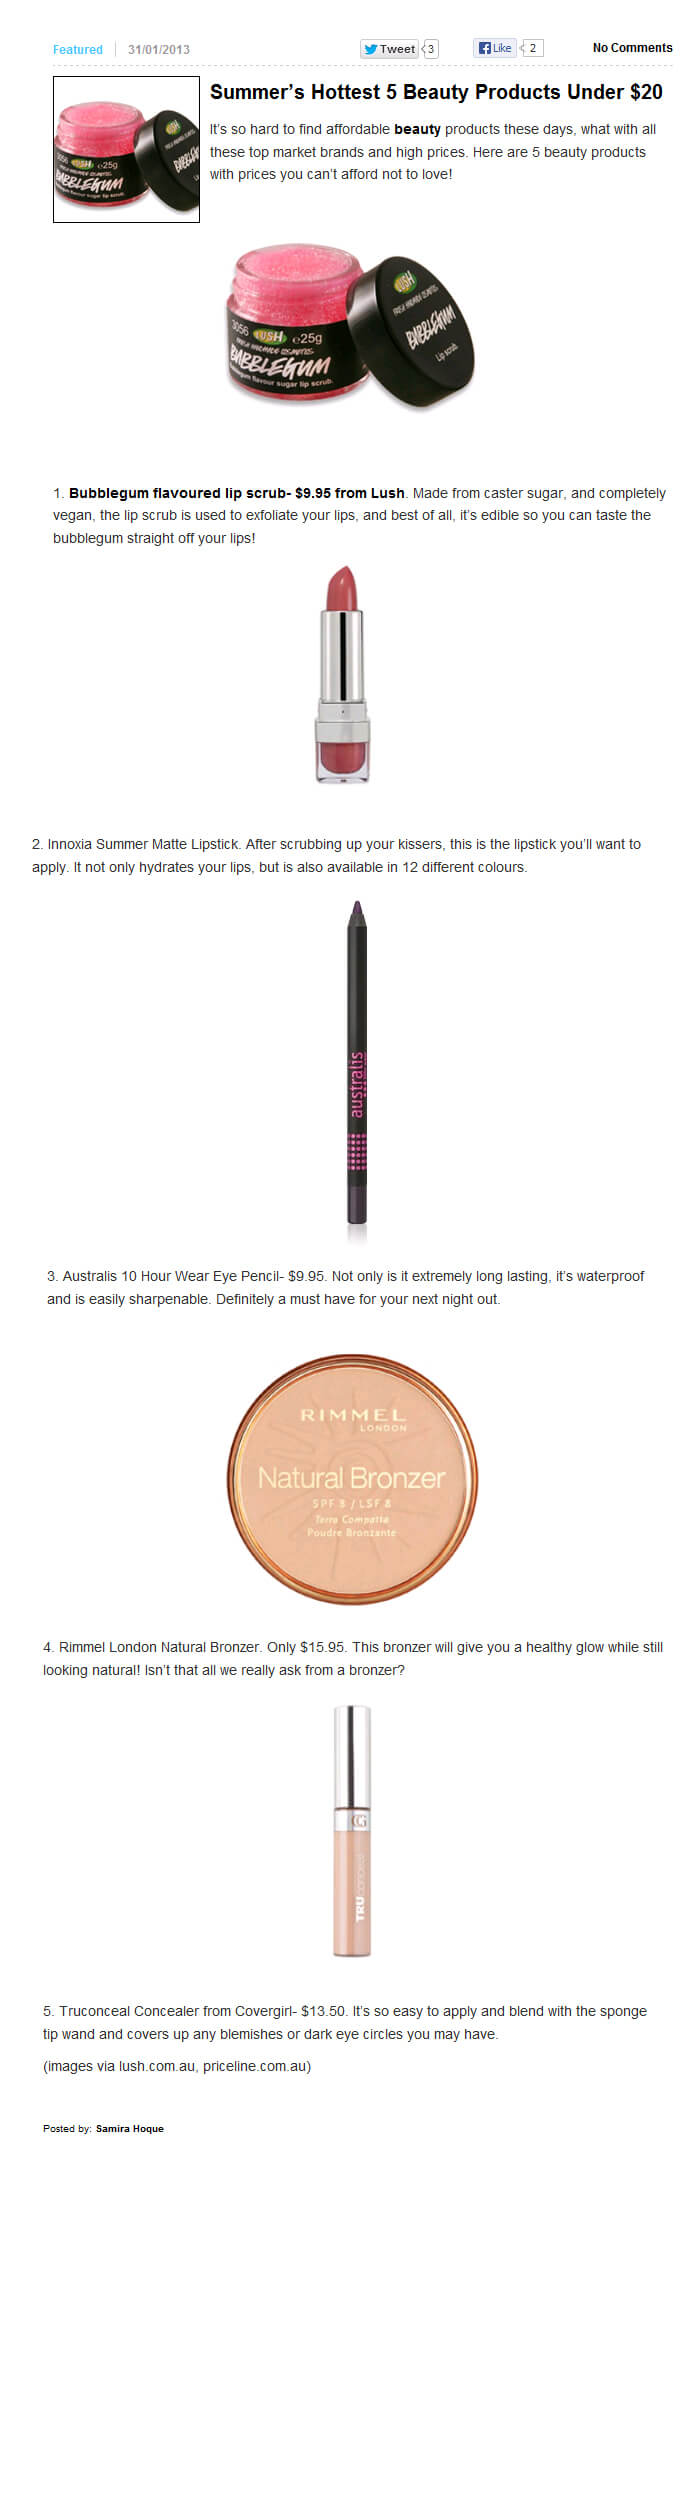 Photo of Summers Hottest Beauty Products Under $20 from 2threads.com